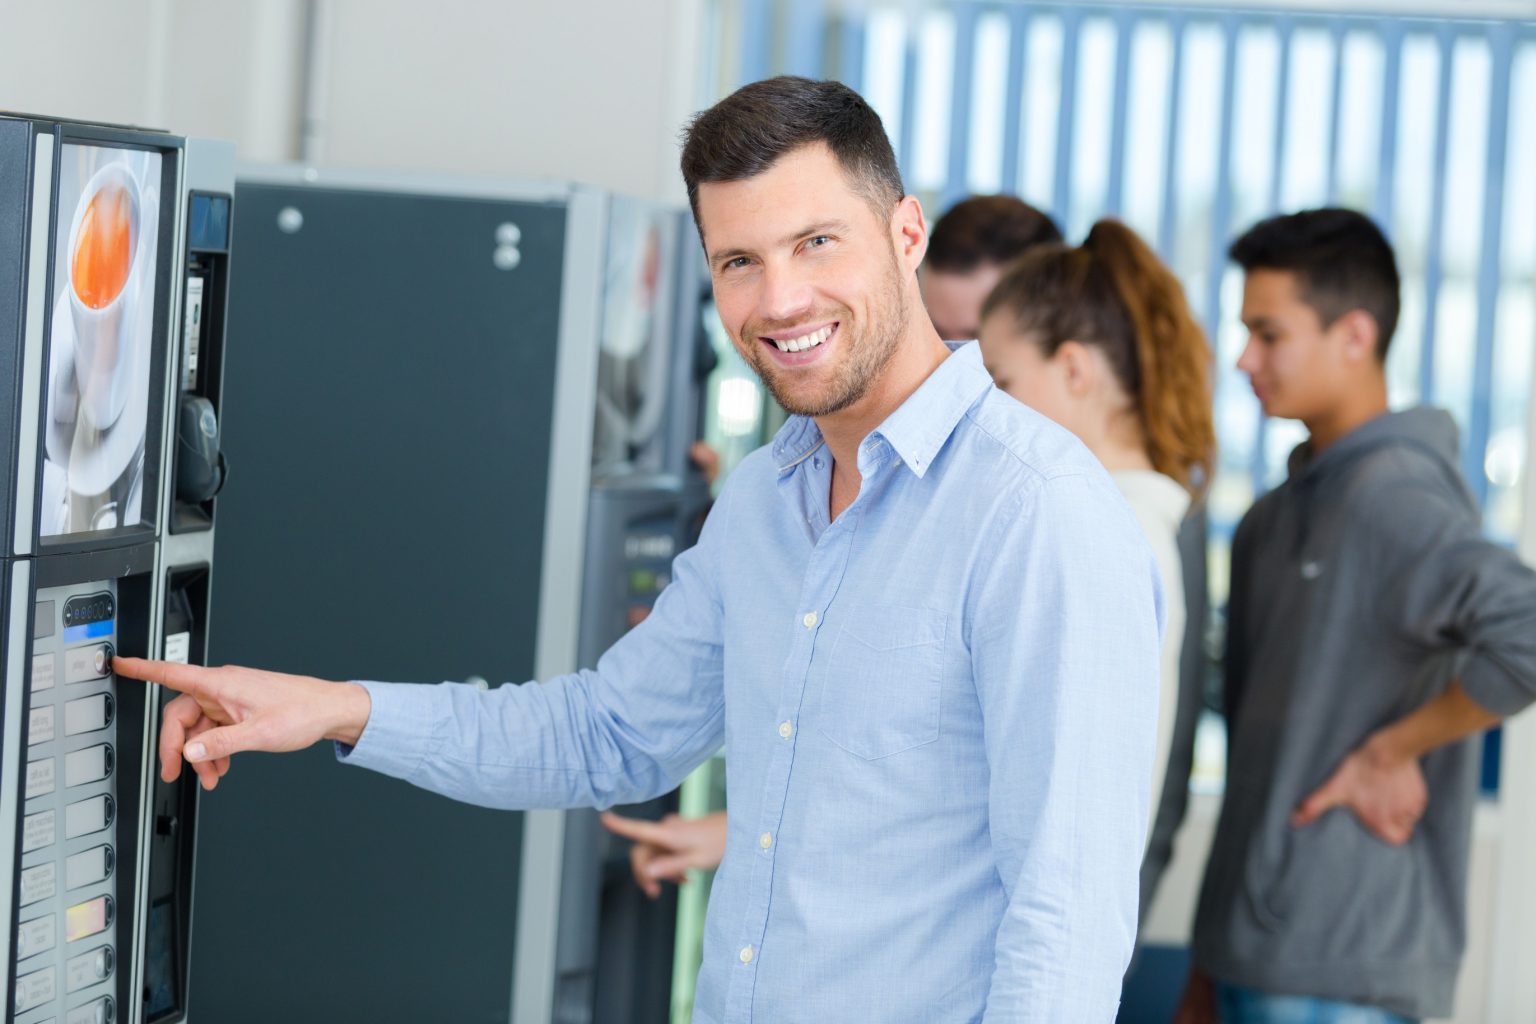 vending technology in greenville, spartanburg, and anderson, south carolina break rooms